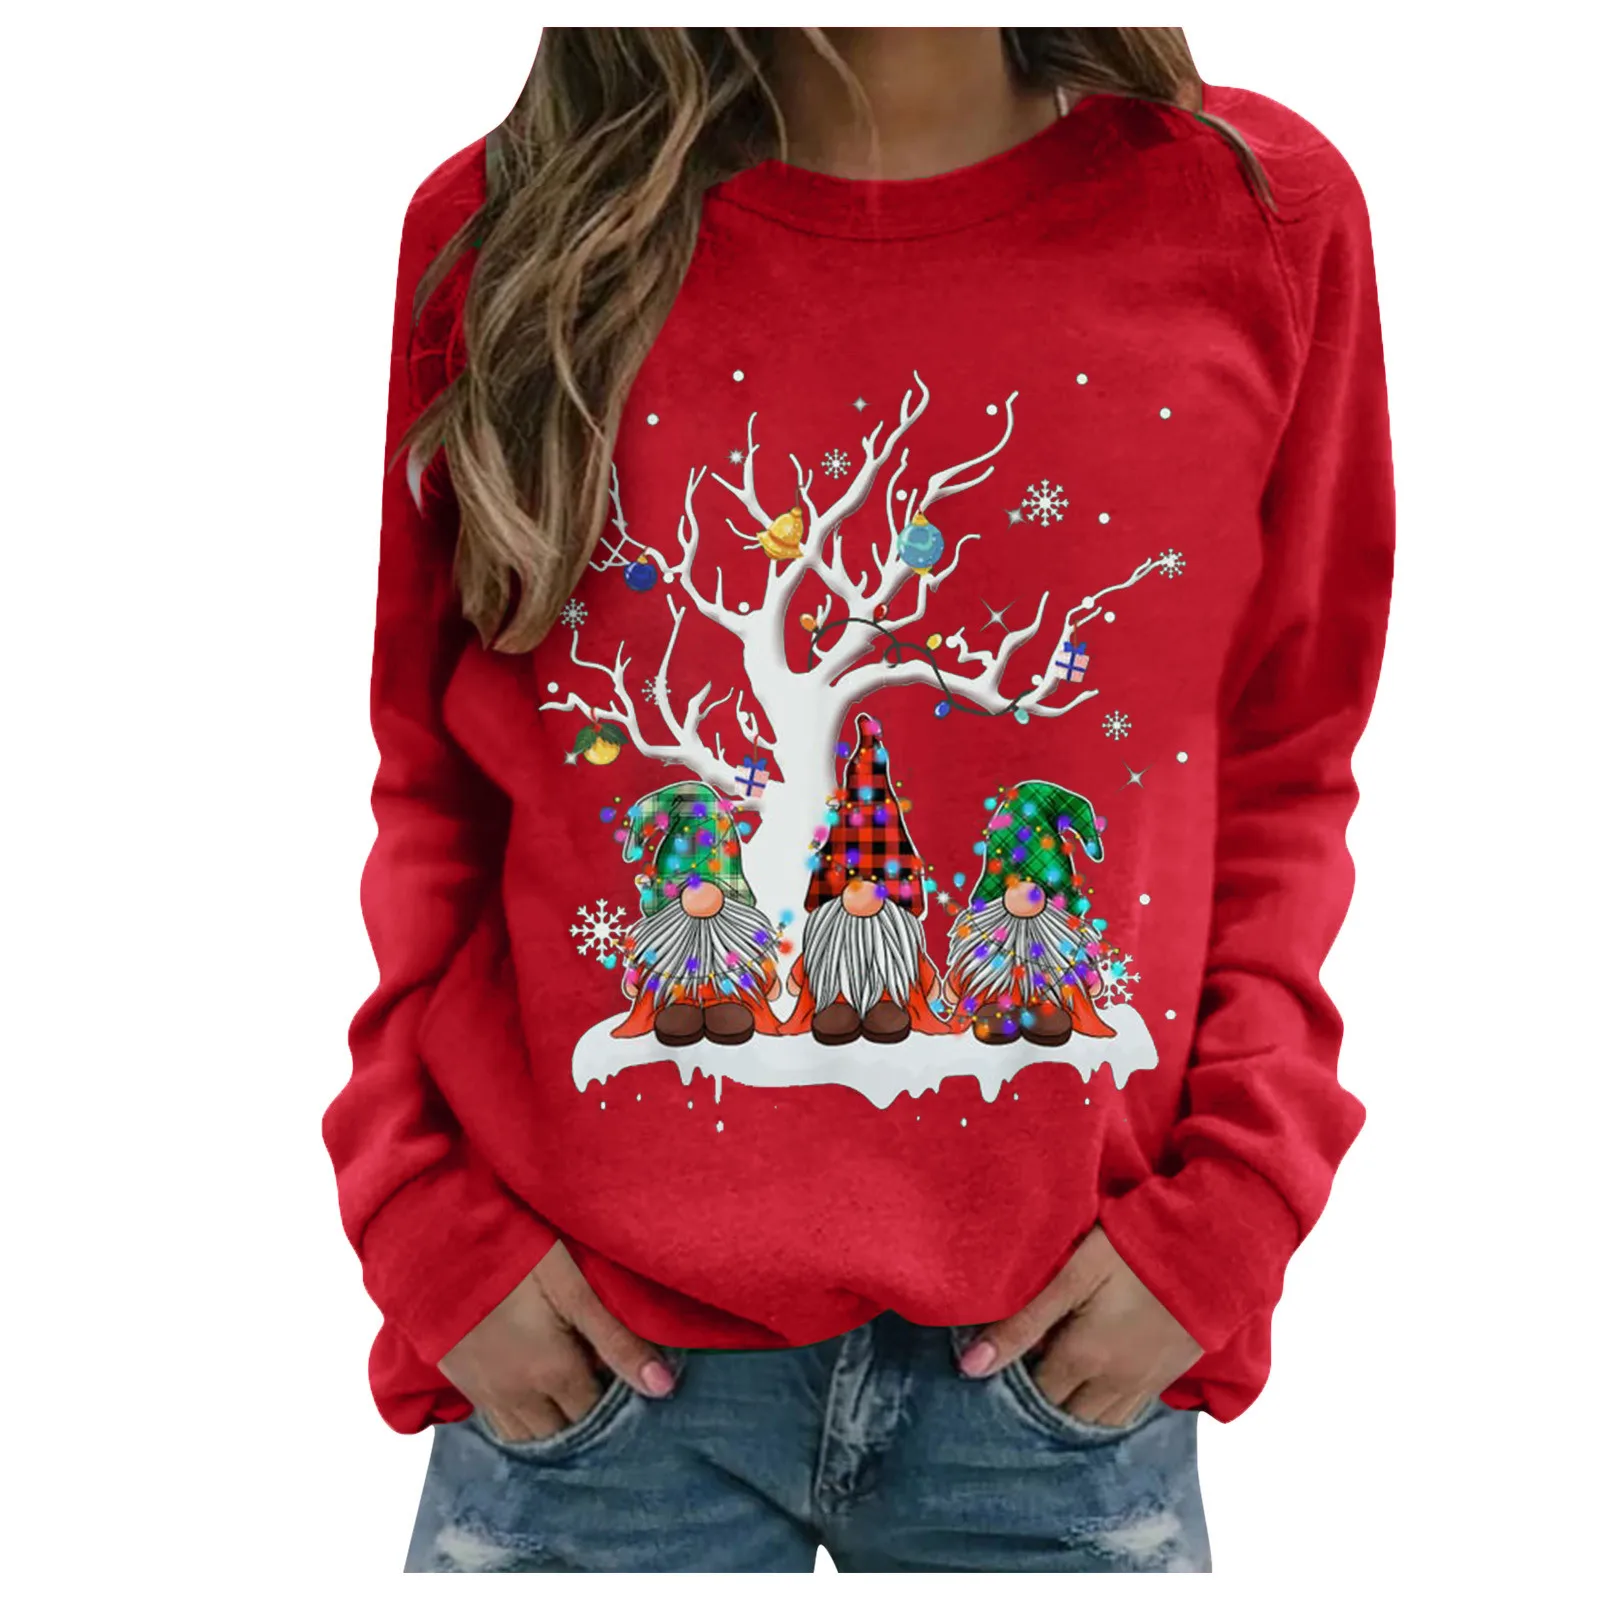 Christmas Women Printed Sweatshirt for leisure, party, Street wear, daily wear, makes you charming and fashionable